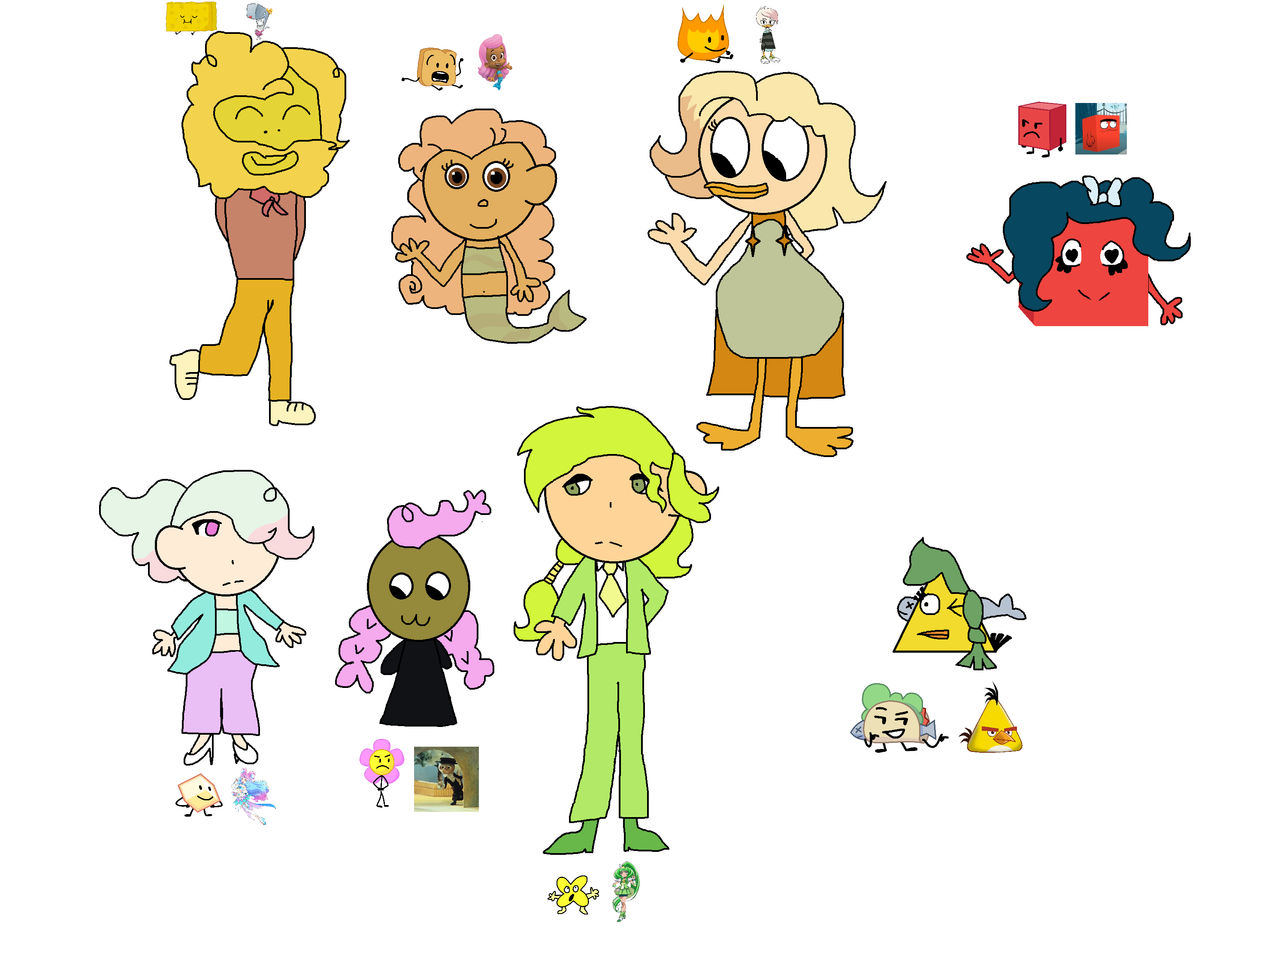 doodlesskaboodles on X: gen 3 bfdi assets are done!